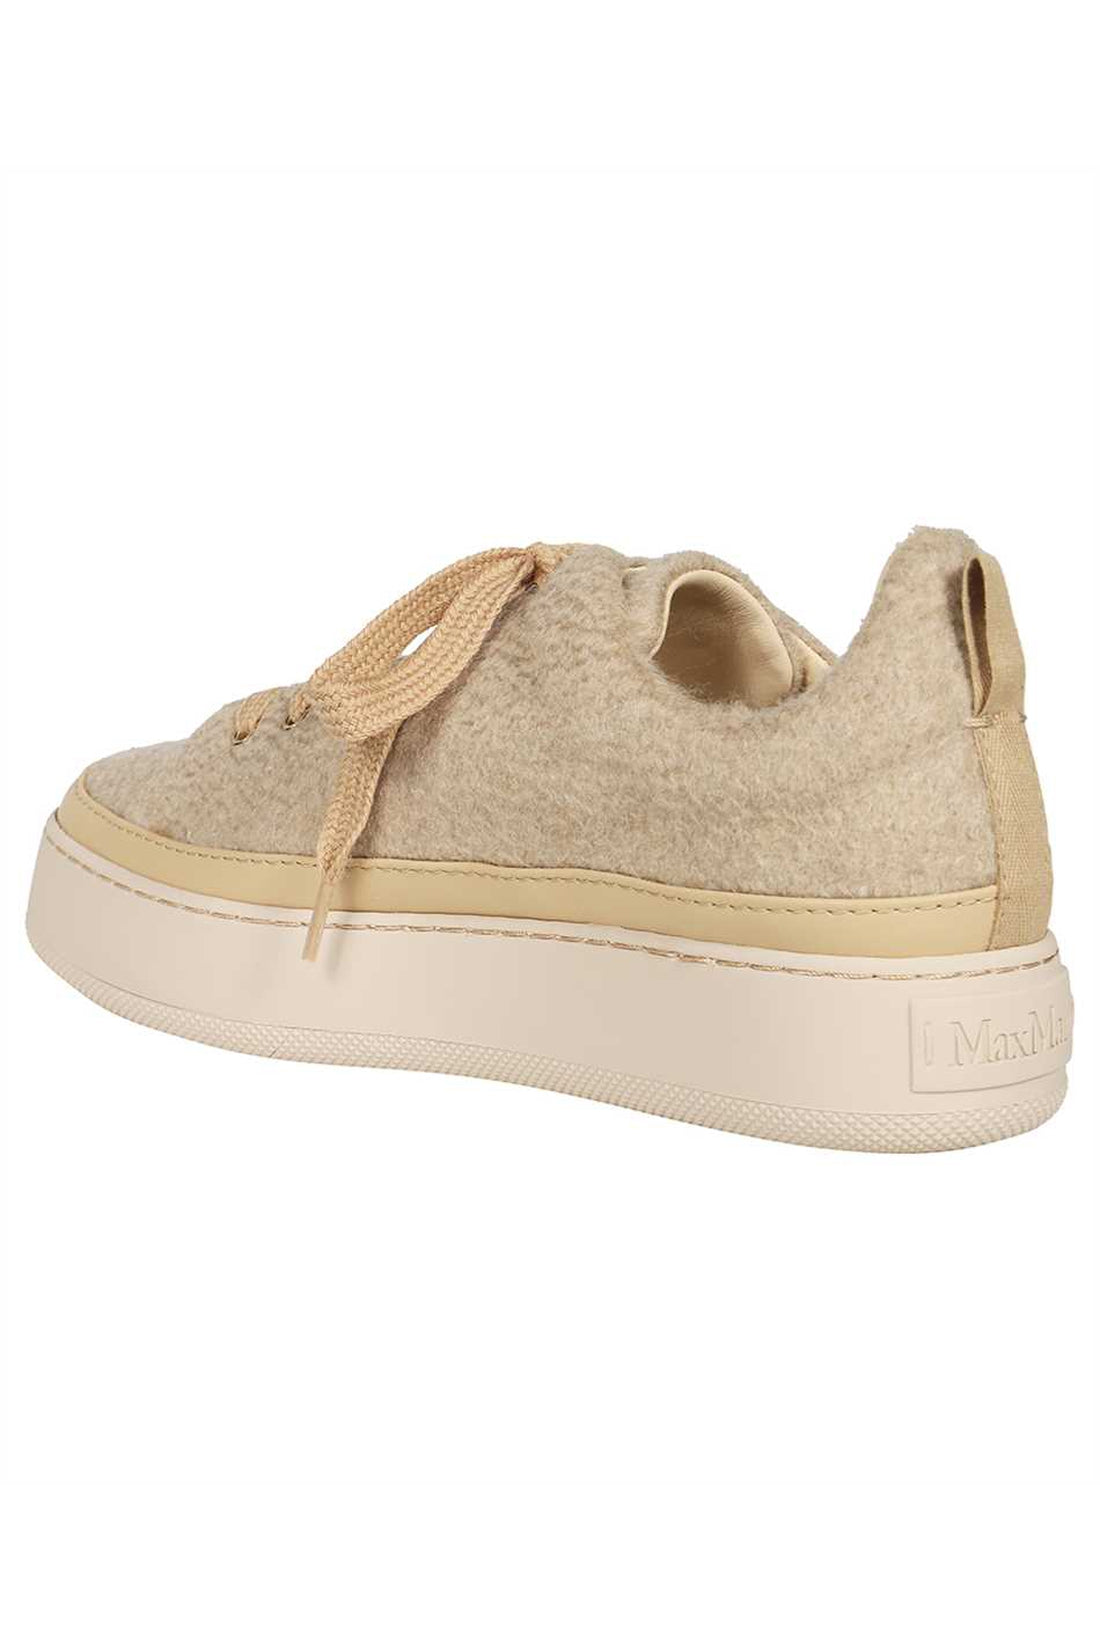 Max Mara-OUTLET-SALE-Tunny low-top sneakers-ARCHIVIST